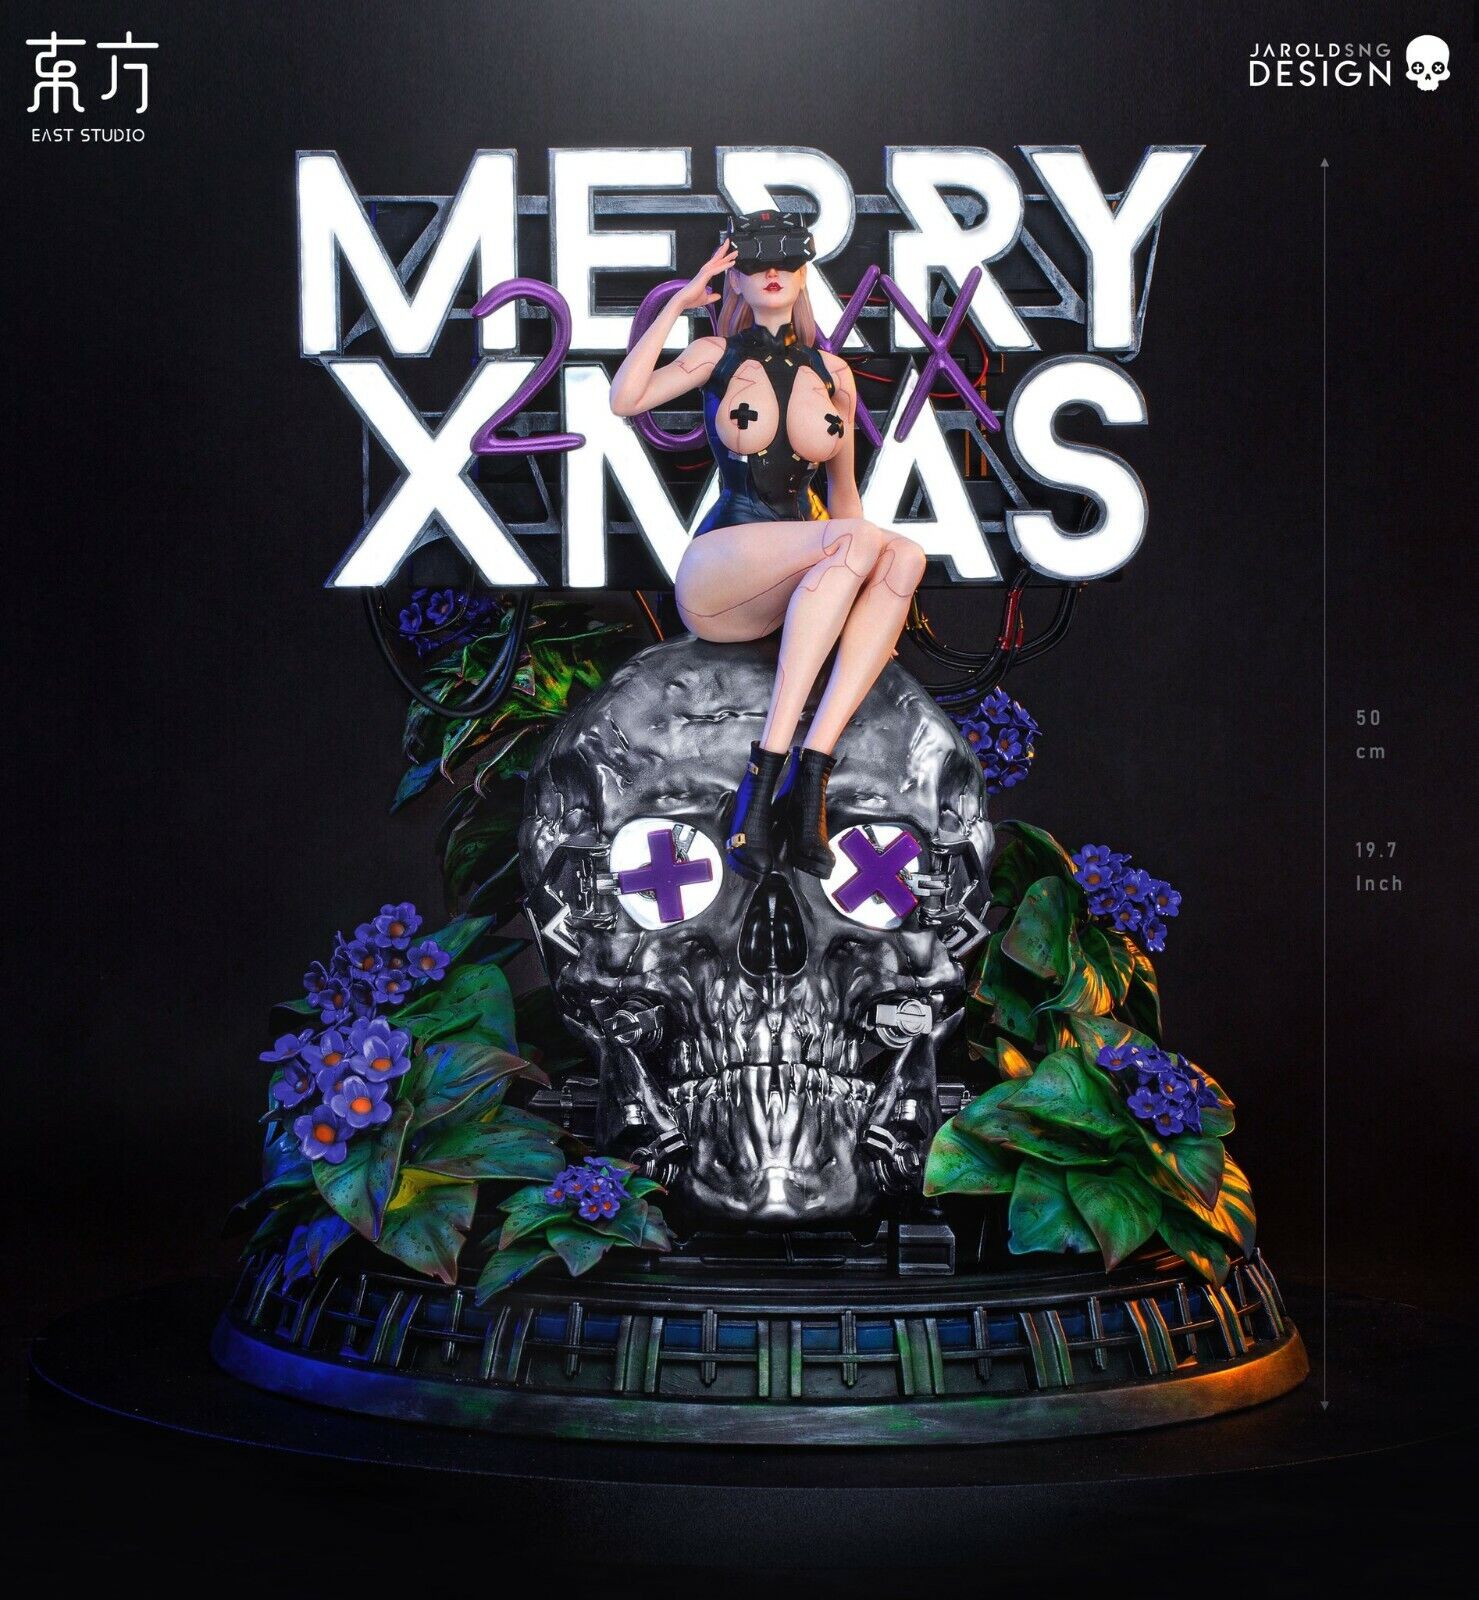 【In-Stock】 Metaverse Girl Merry Xmas Silver Christmas LED GK Statue East Studio